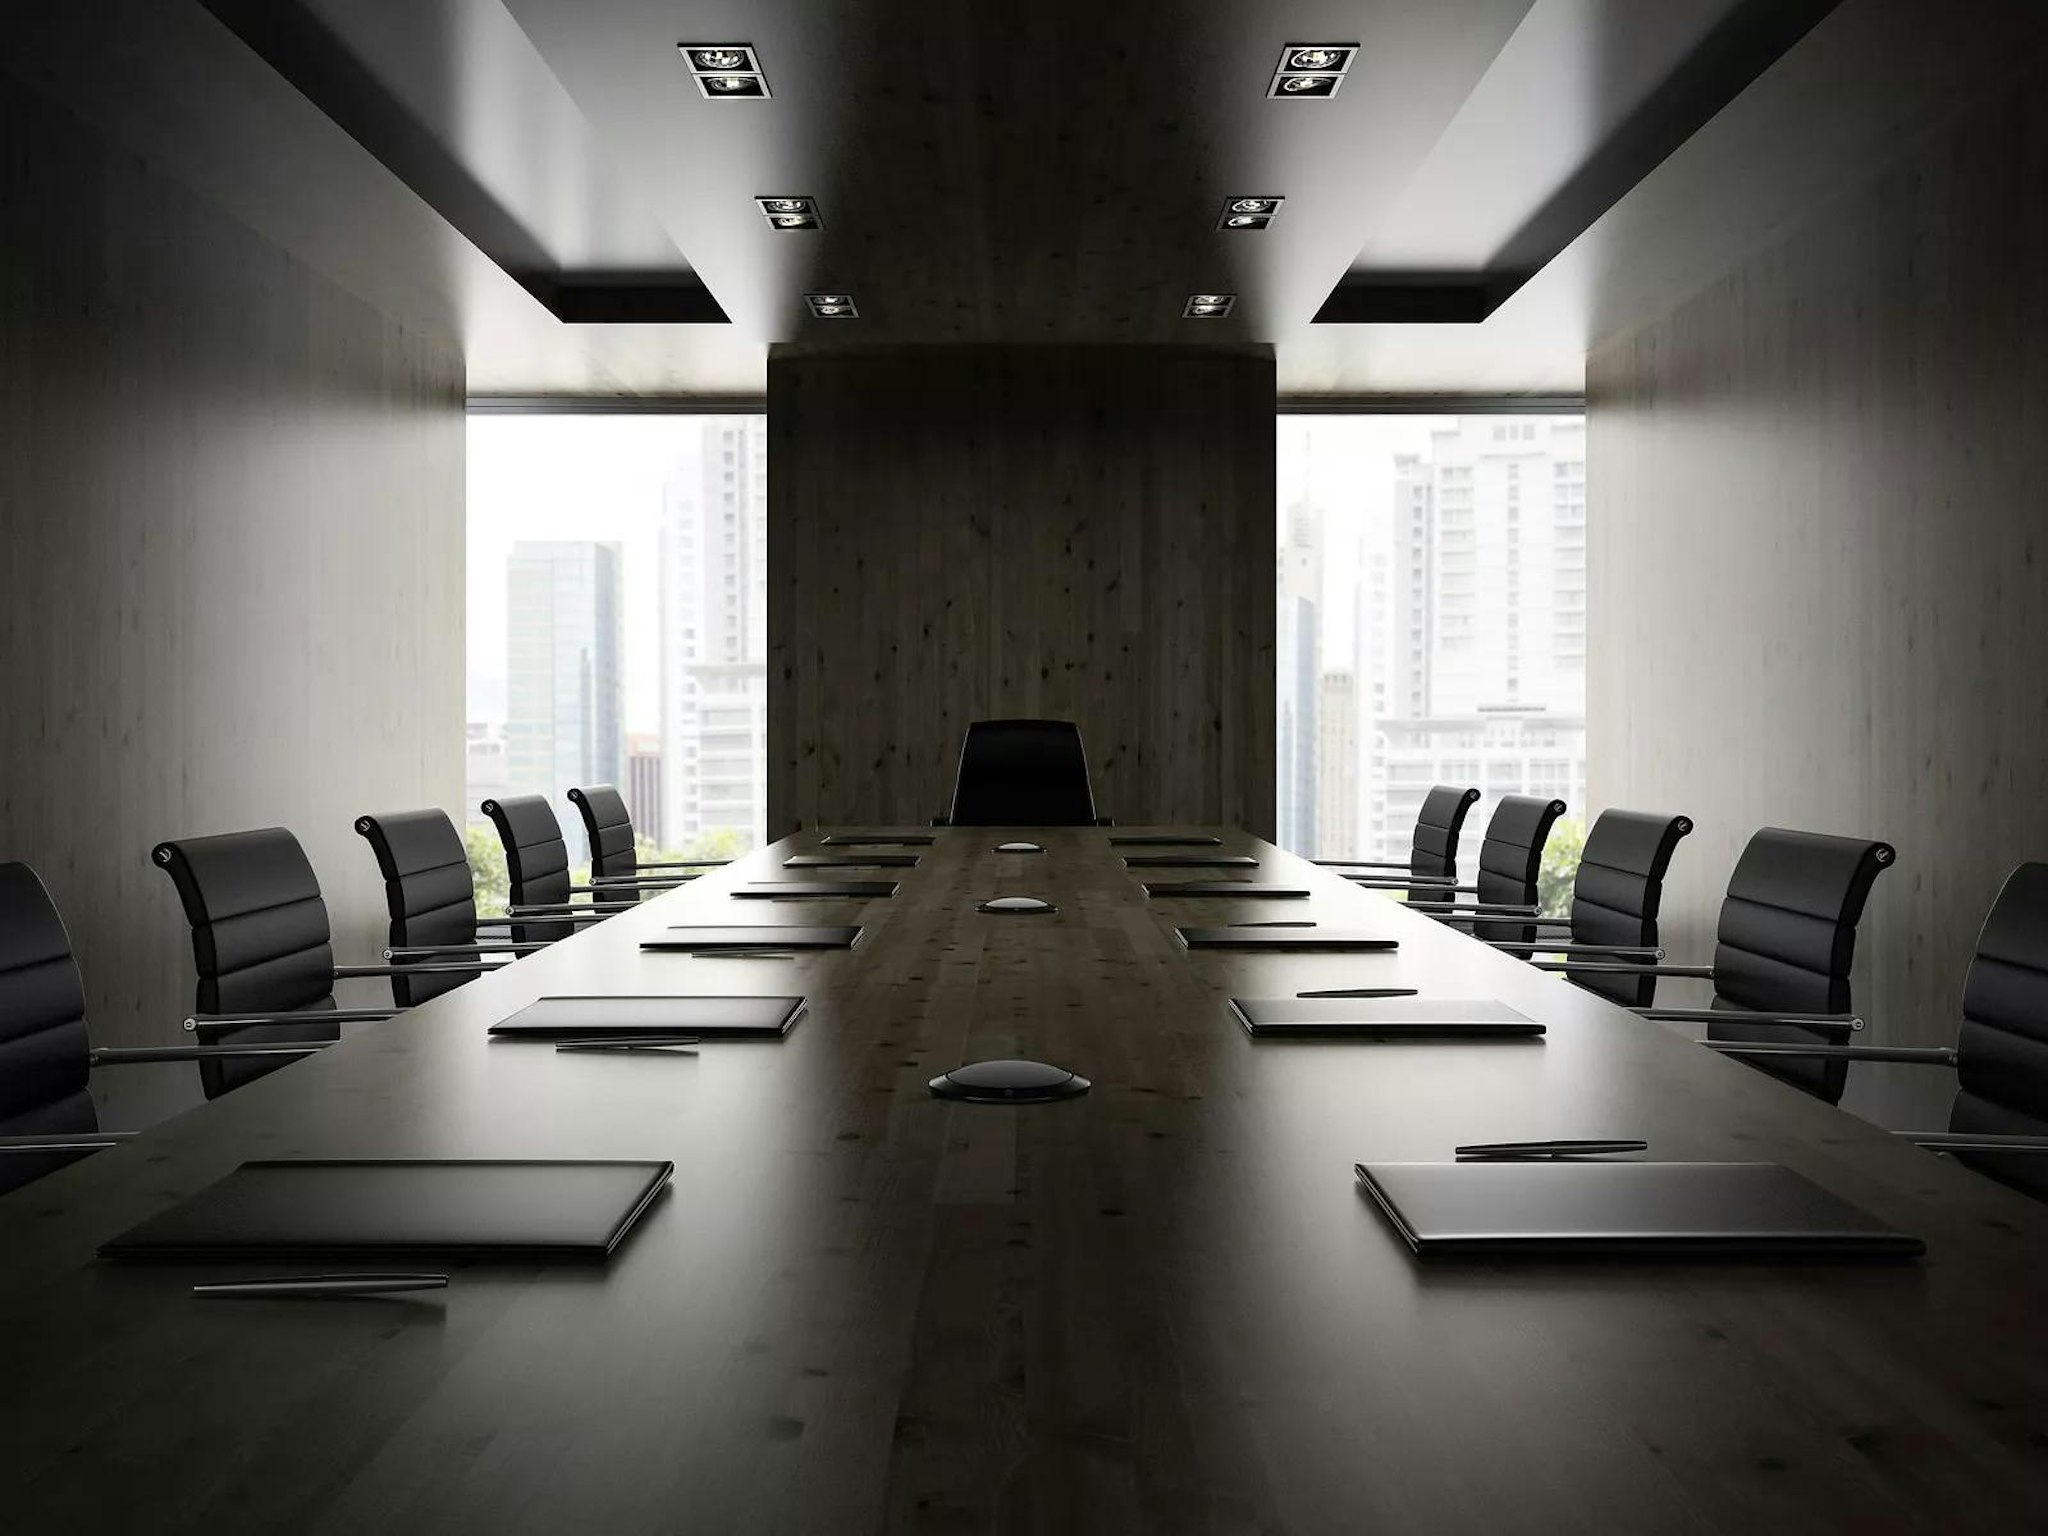 Image of a boardroom representing corporate governance regulations